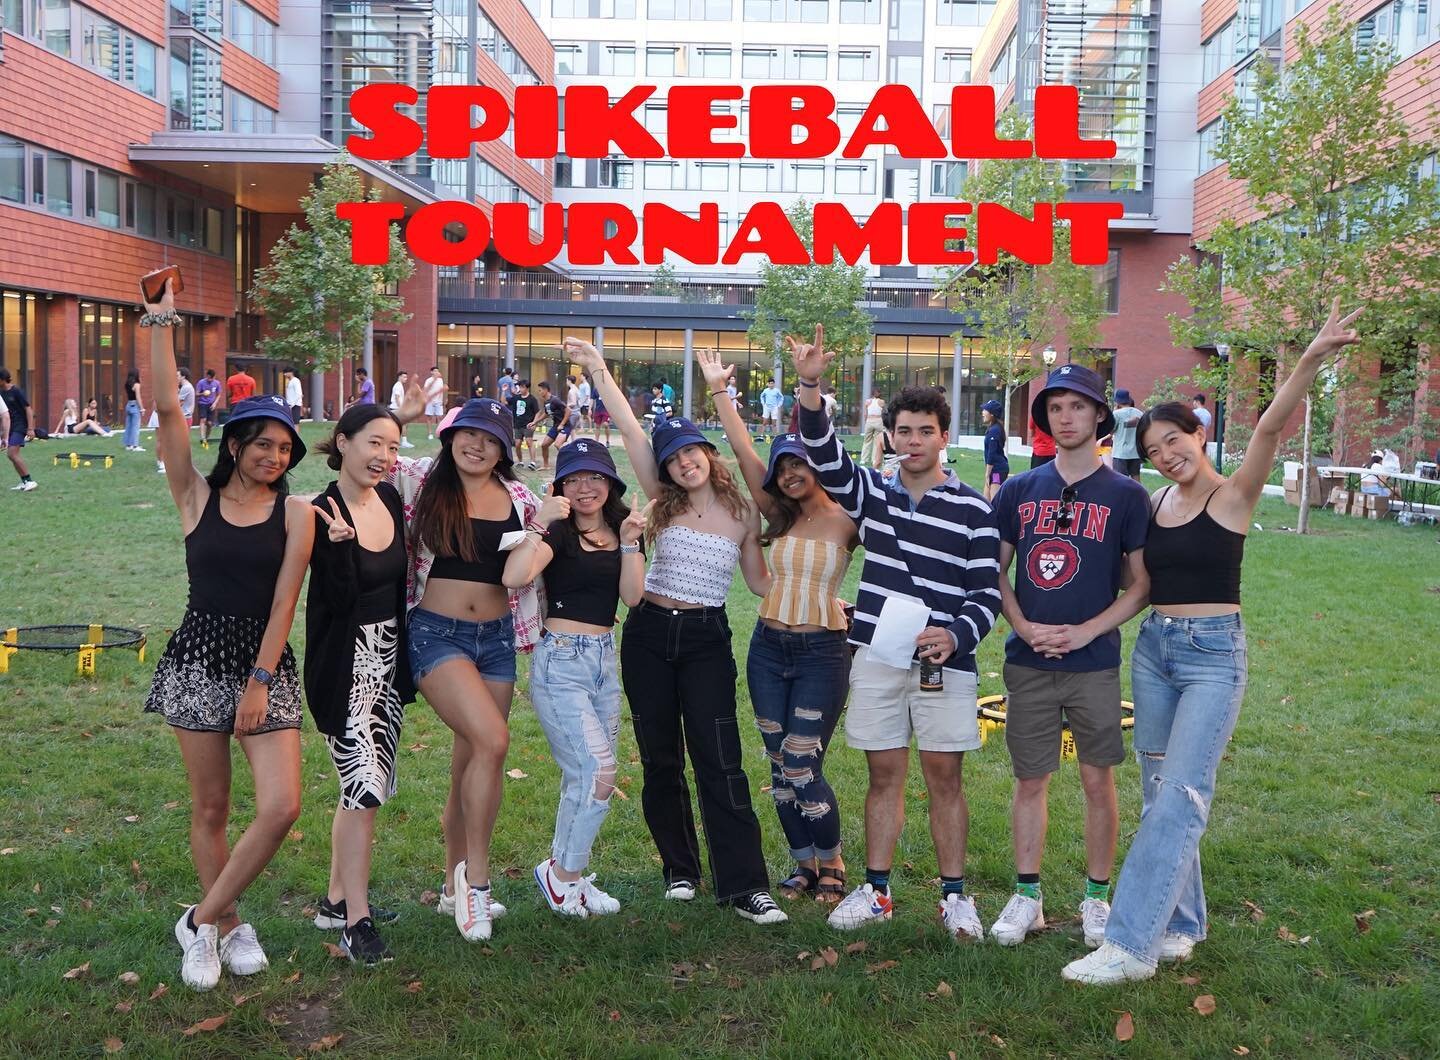 thank you everyone for coming to our spikeball tournament &amp; congrats to the winners‼️💙❤️ we hope you all enjoyed this event and had a great first week of classes :)